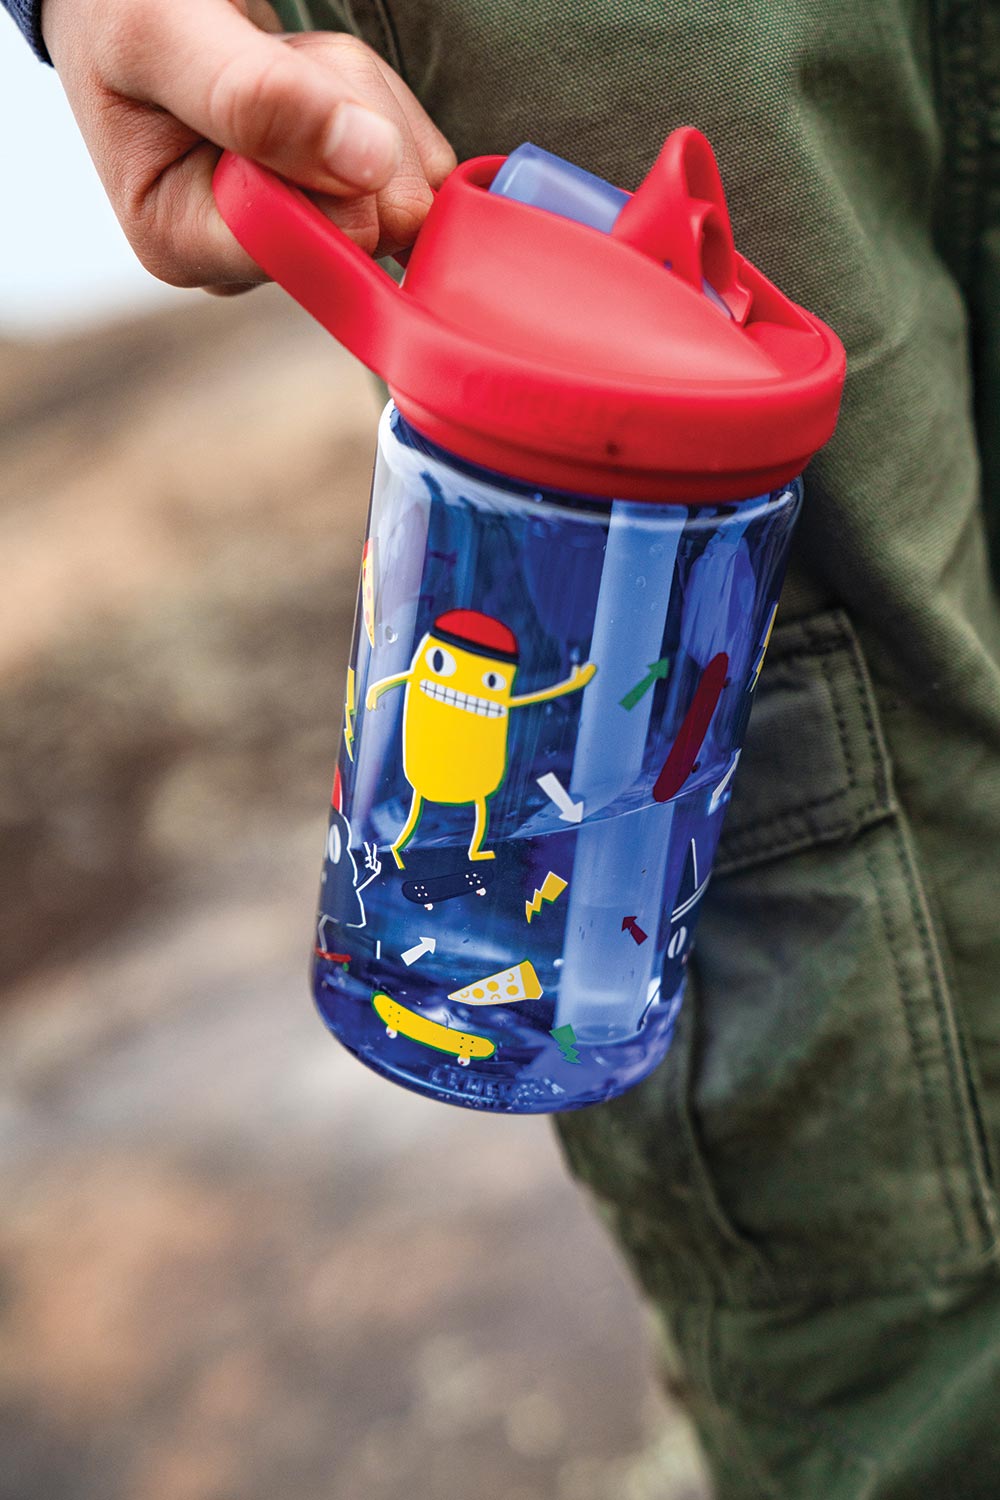 CamelBak / Kids Water Bottles with blue and yellow designs. 